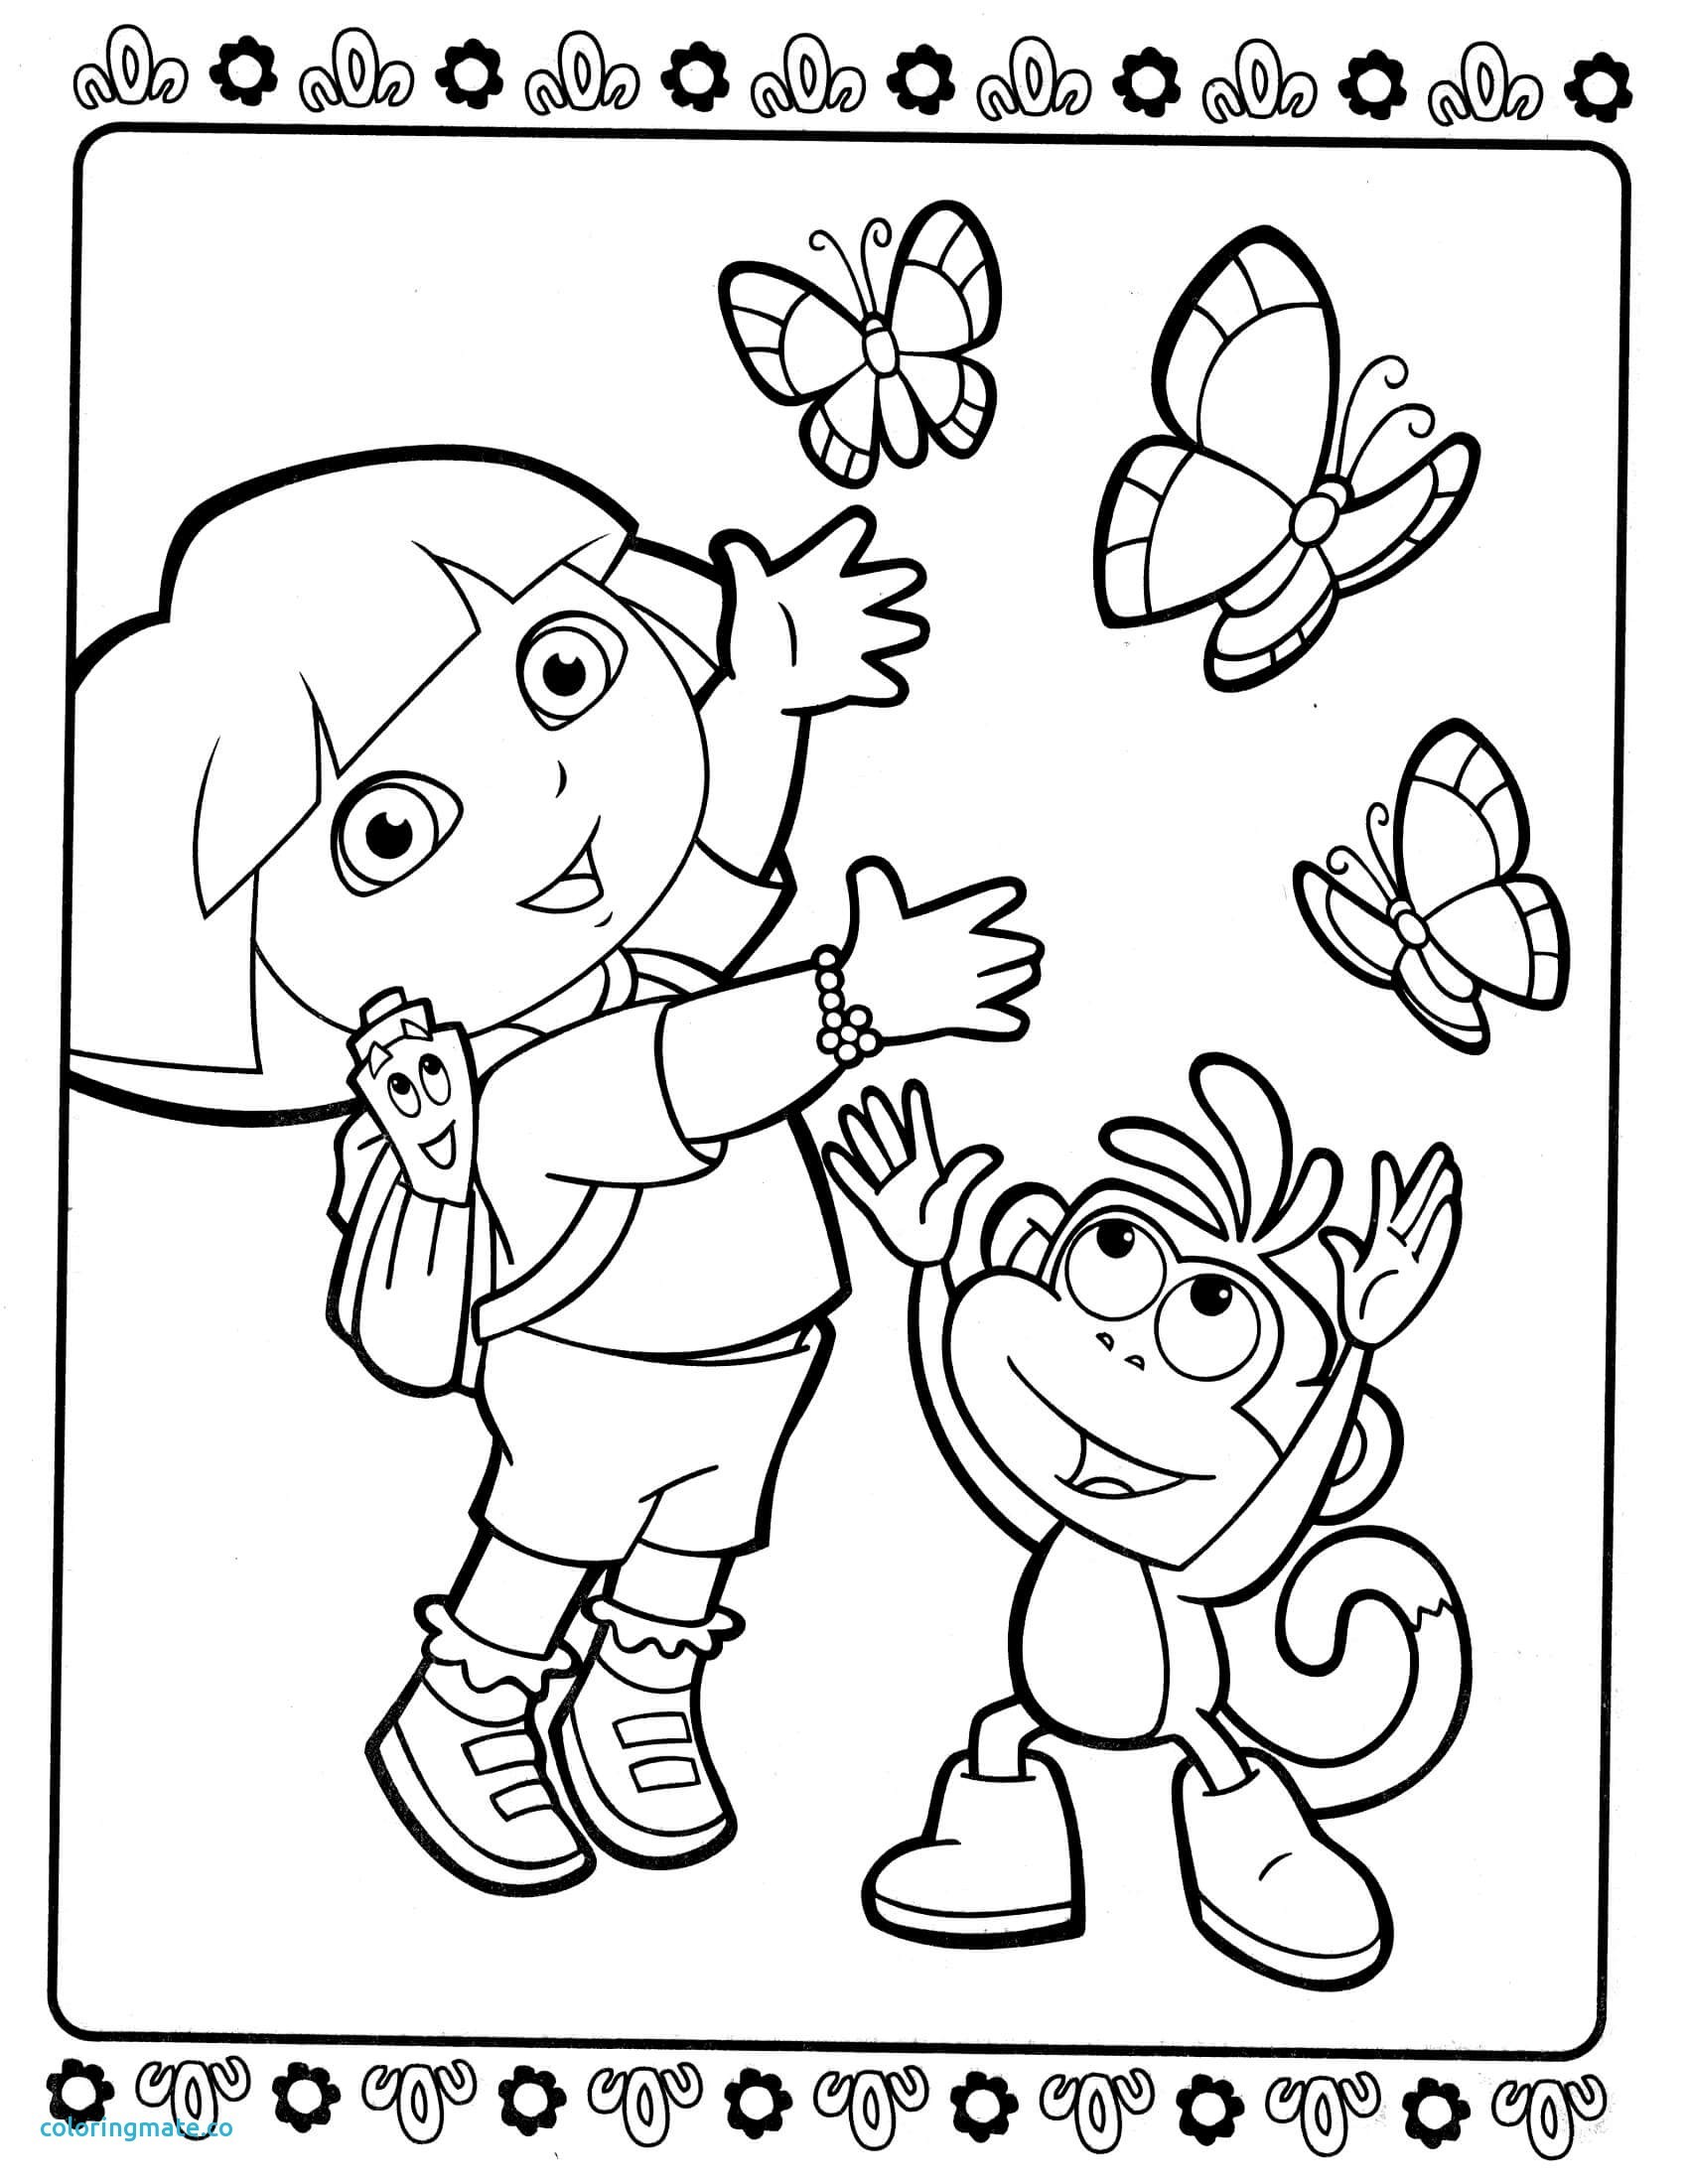 Dora And Friends Coloring Pages - Coloring Home